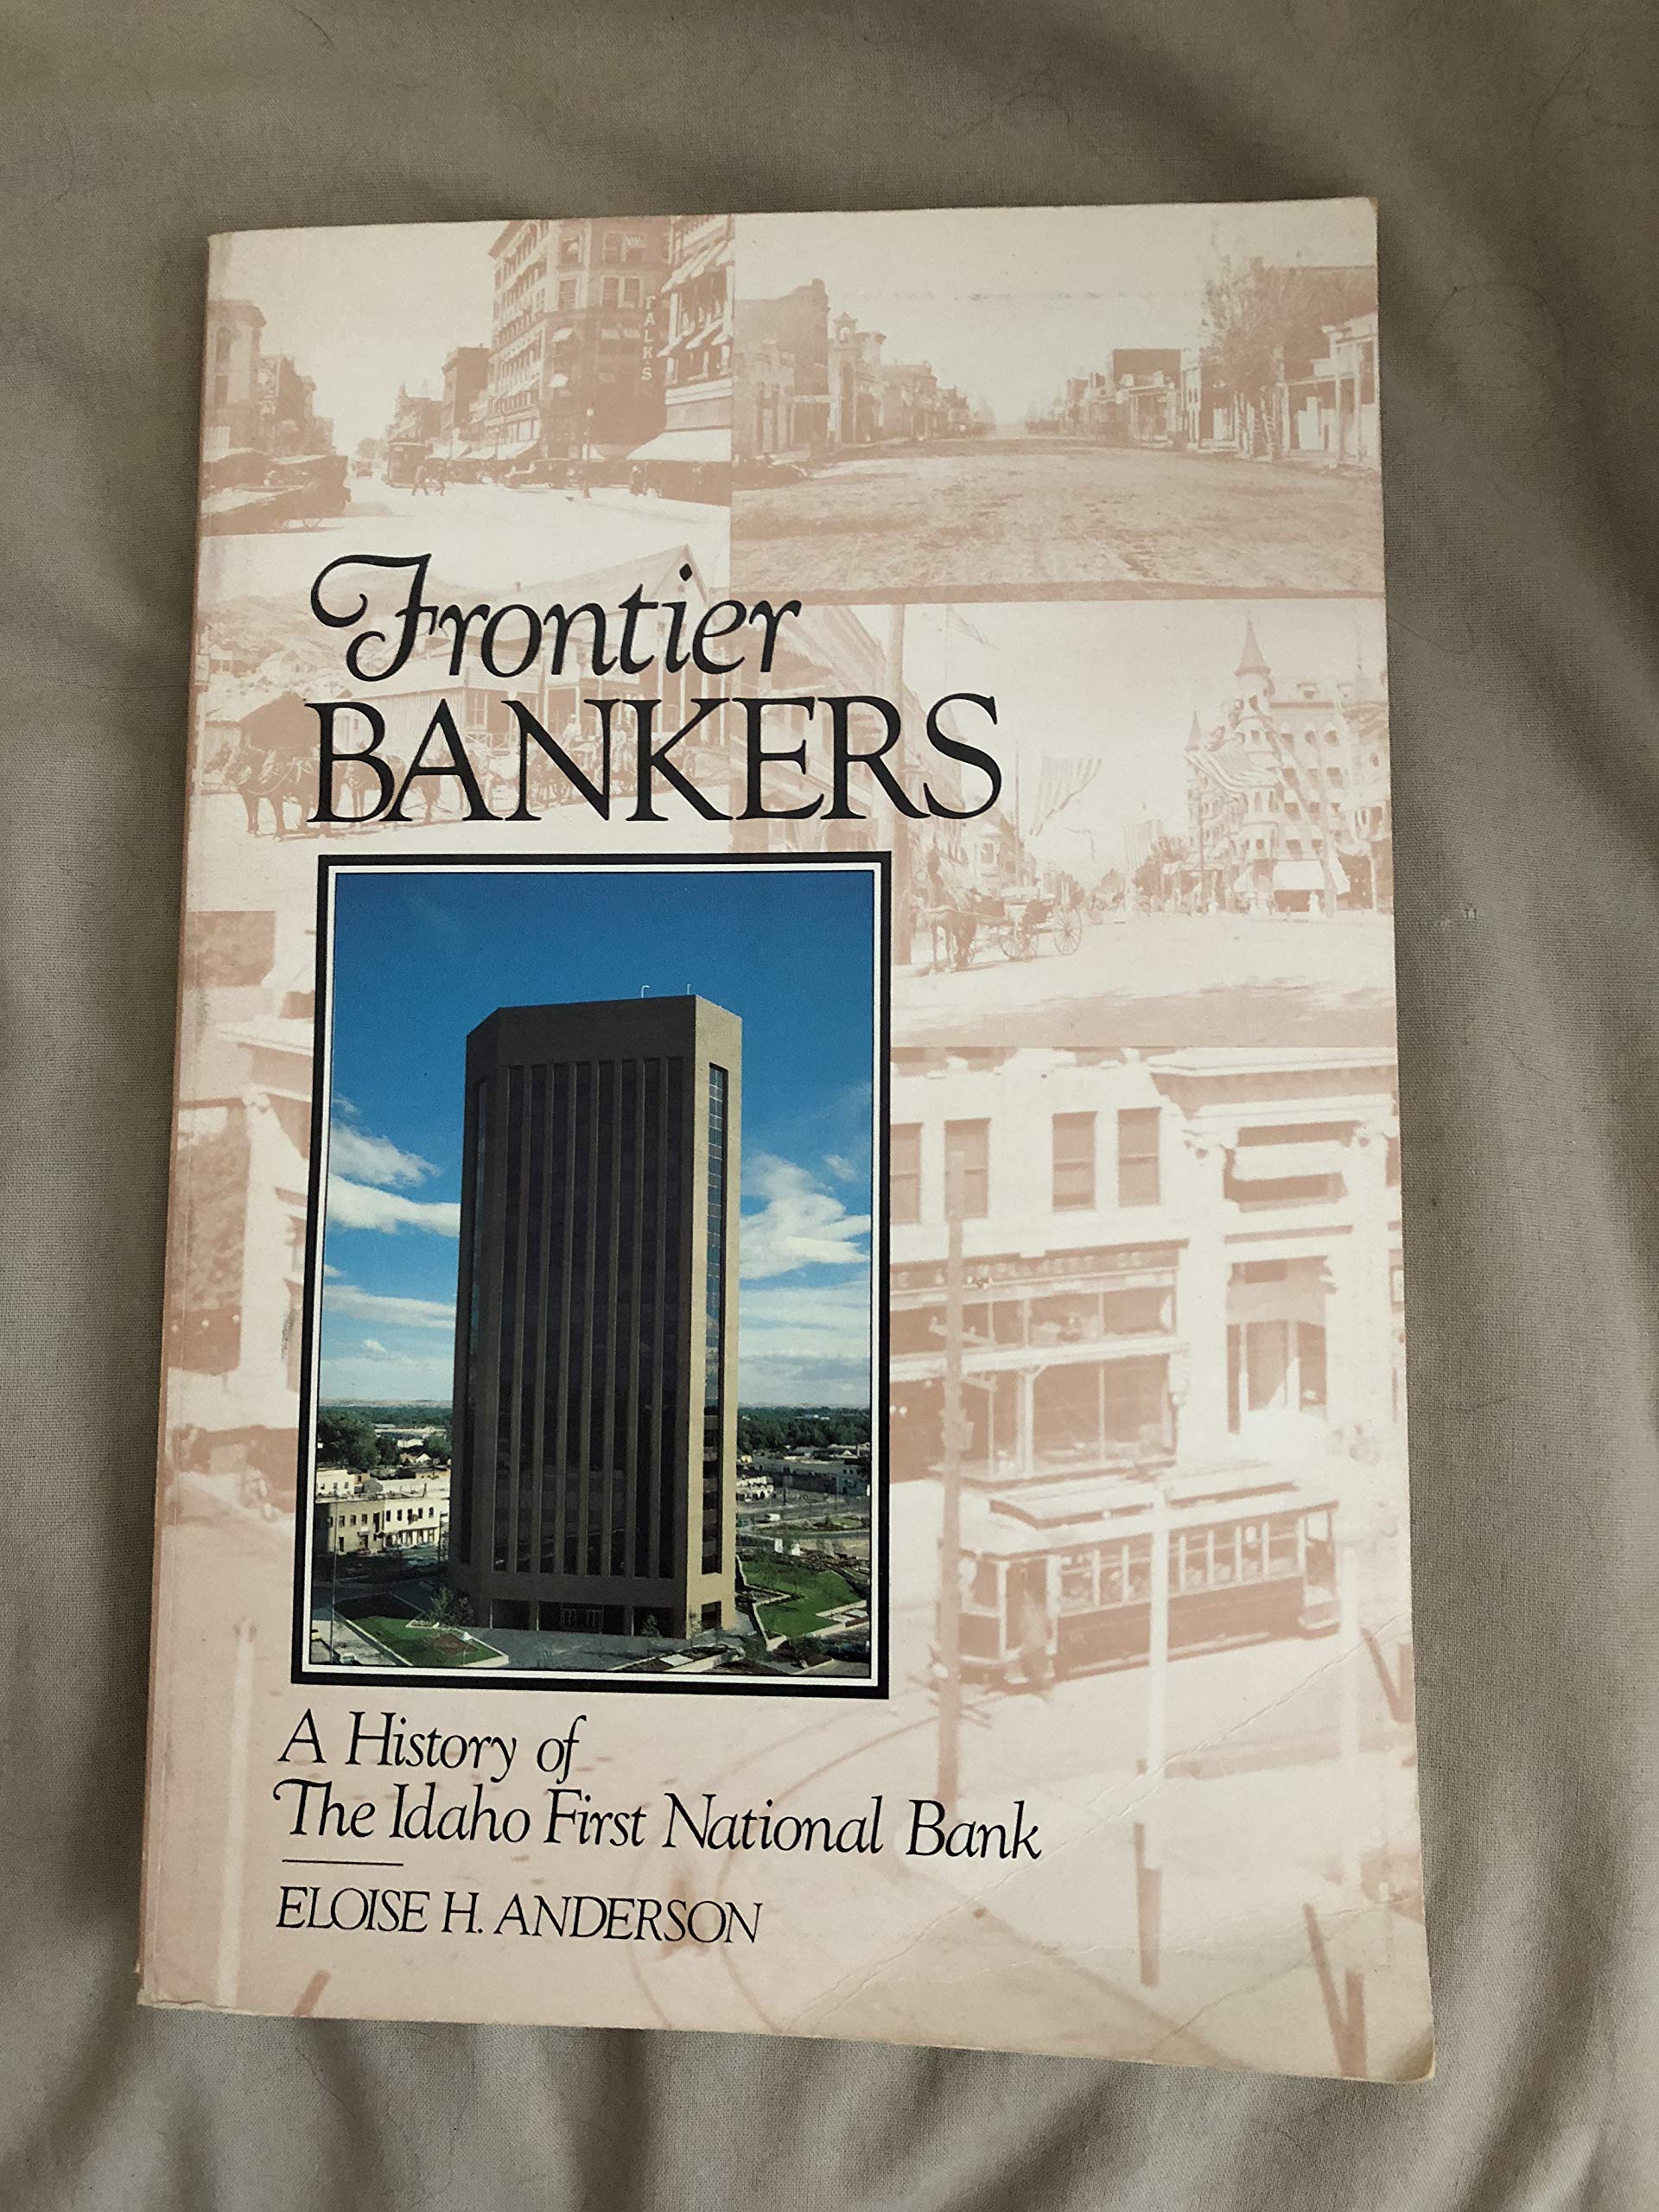 Frontier bankers: A history of The Idaho First National Bank (book cover)